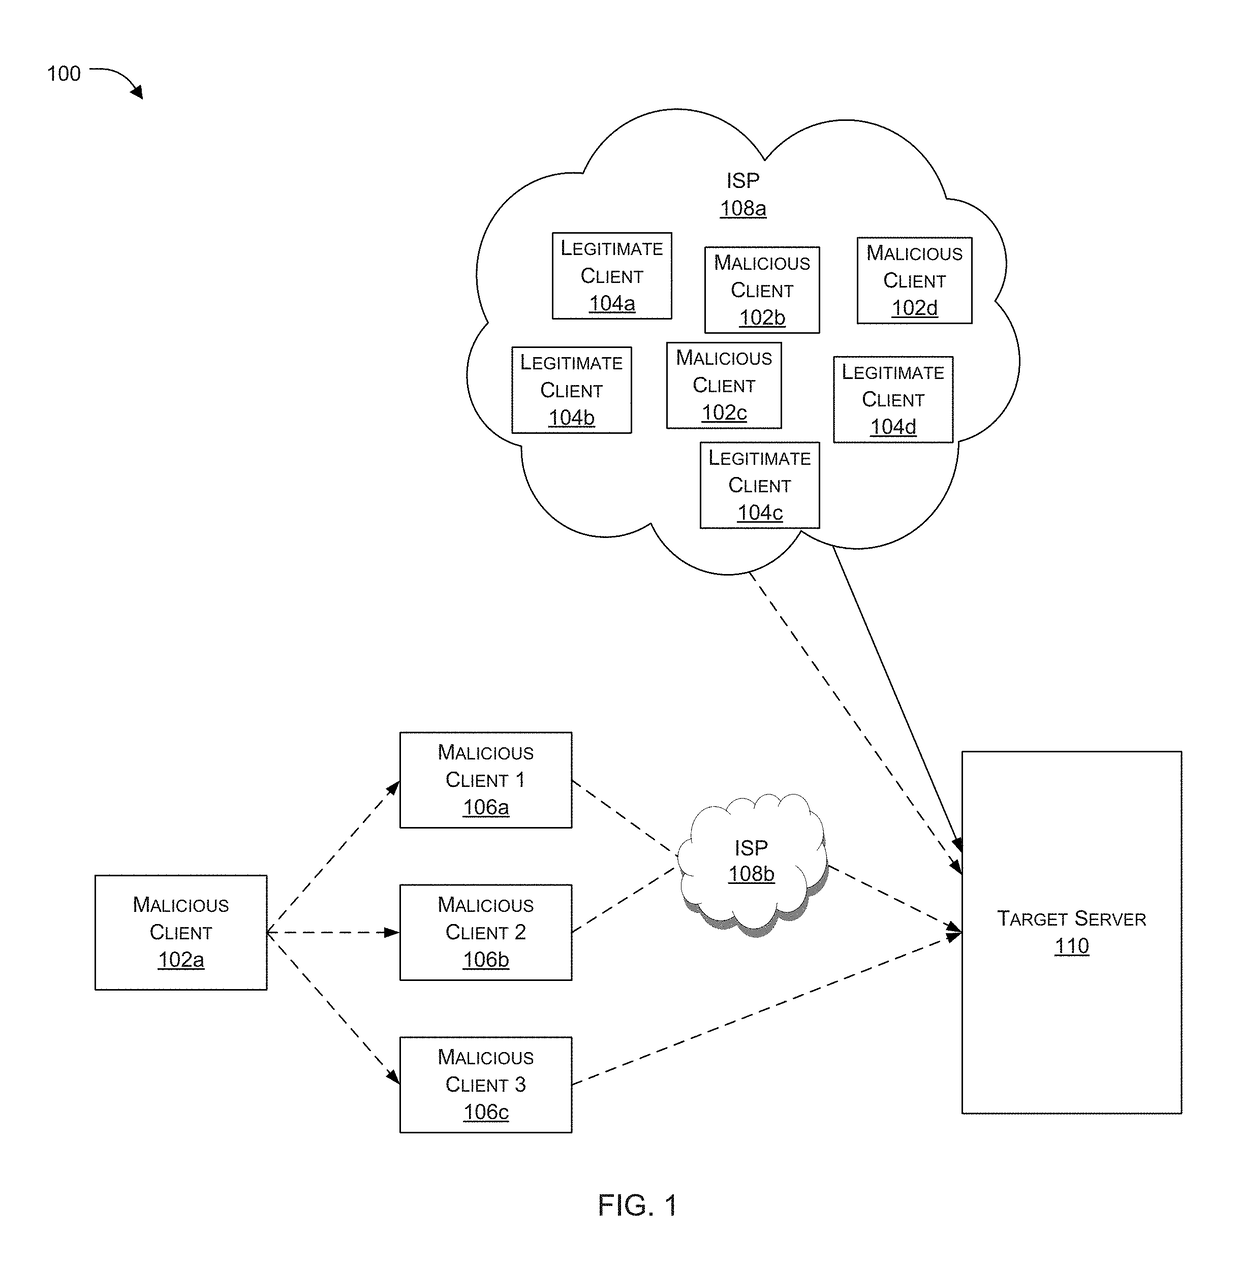 Denial-of-service (DOS) mitigation approach based on connection characteristics